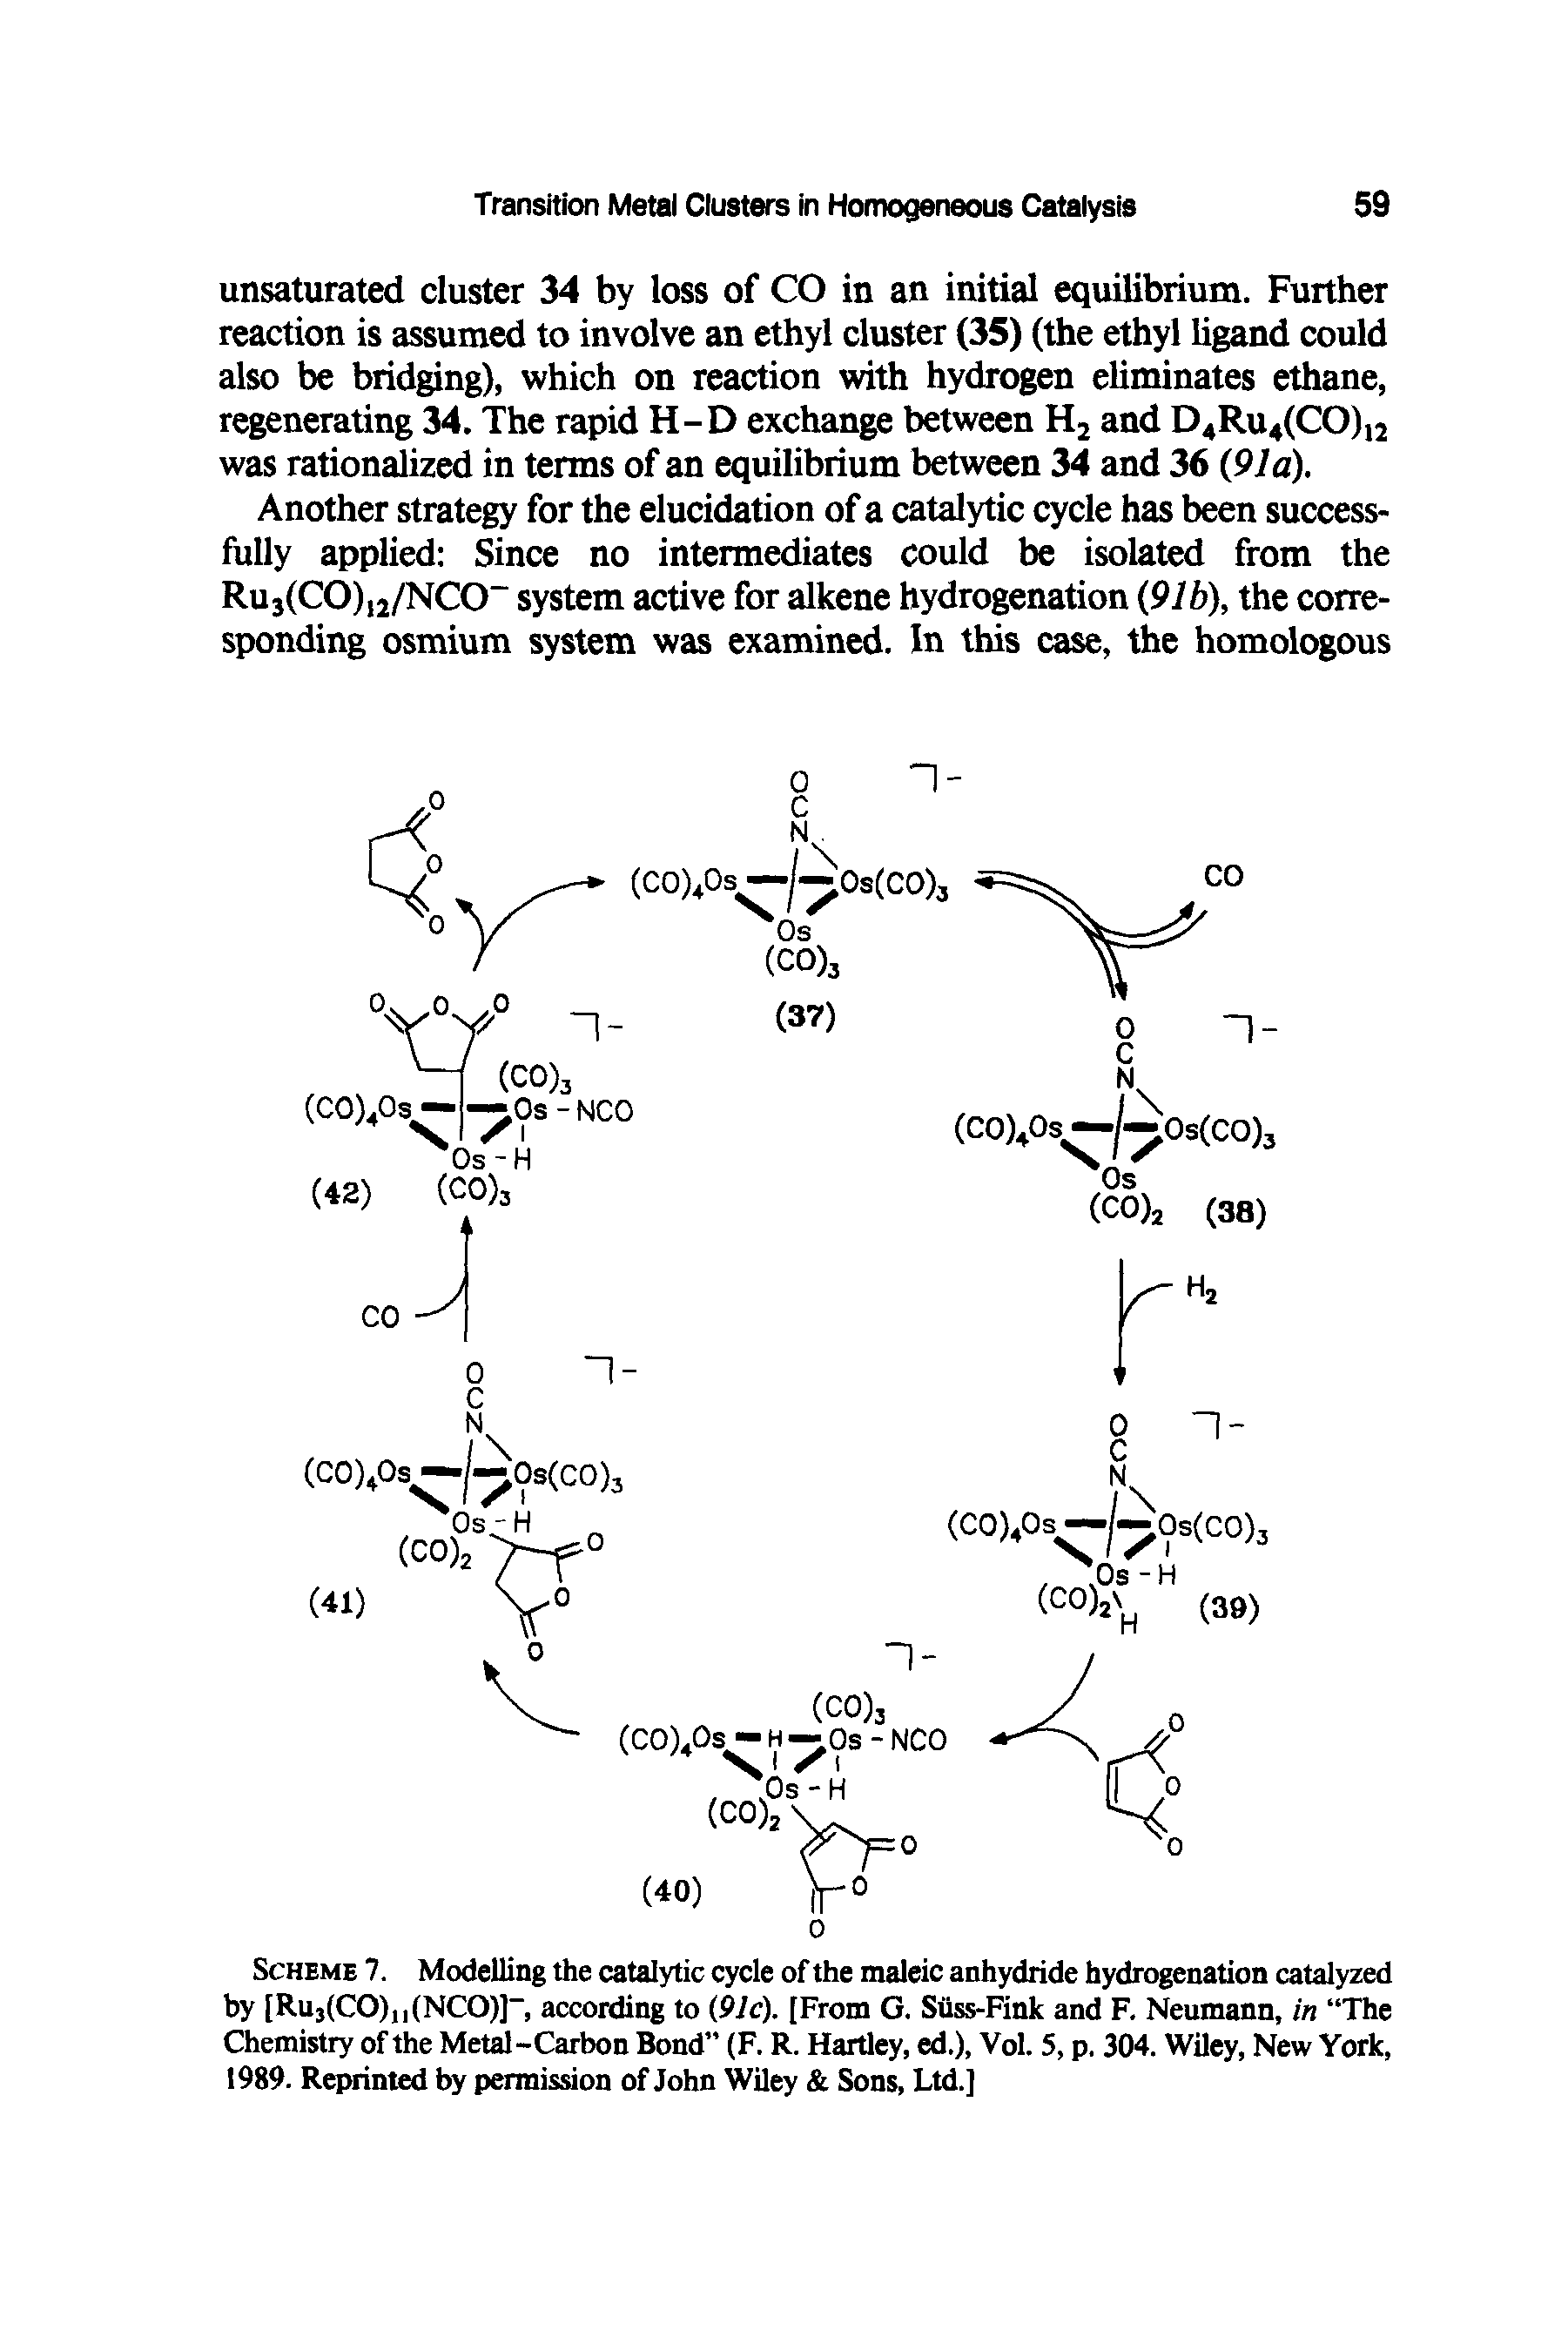 Scheme 7. Modelling the catalytic cycle of the maleic anhydride hydrogenation catalyzed by [Ru3(CO),(NCO)]-, according to (91c). [From G. Siiss-Fink and F. Neumann, in The Chemistry of the Metal-Carbon Bond (F. R. Hartley, ed.), Vol. 5, p. 304. Wiley, New York, 1989. Reprinted by permission of John Wiley Sons, Ltd.]...